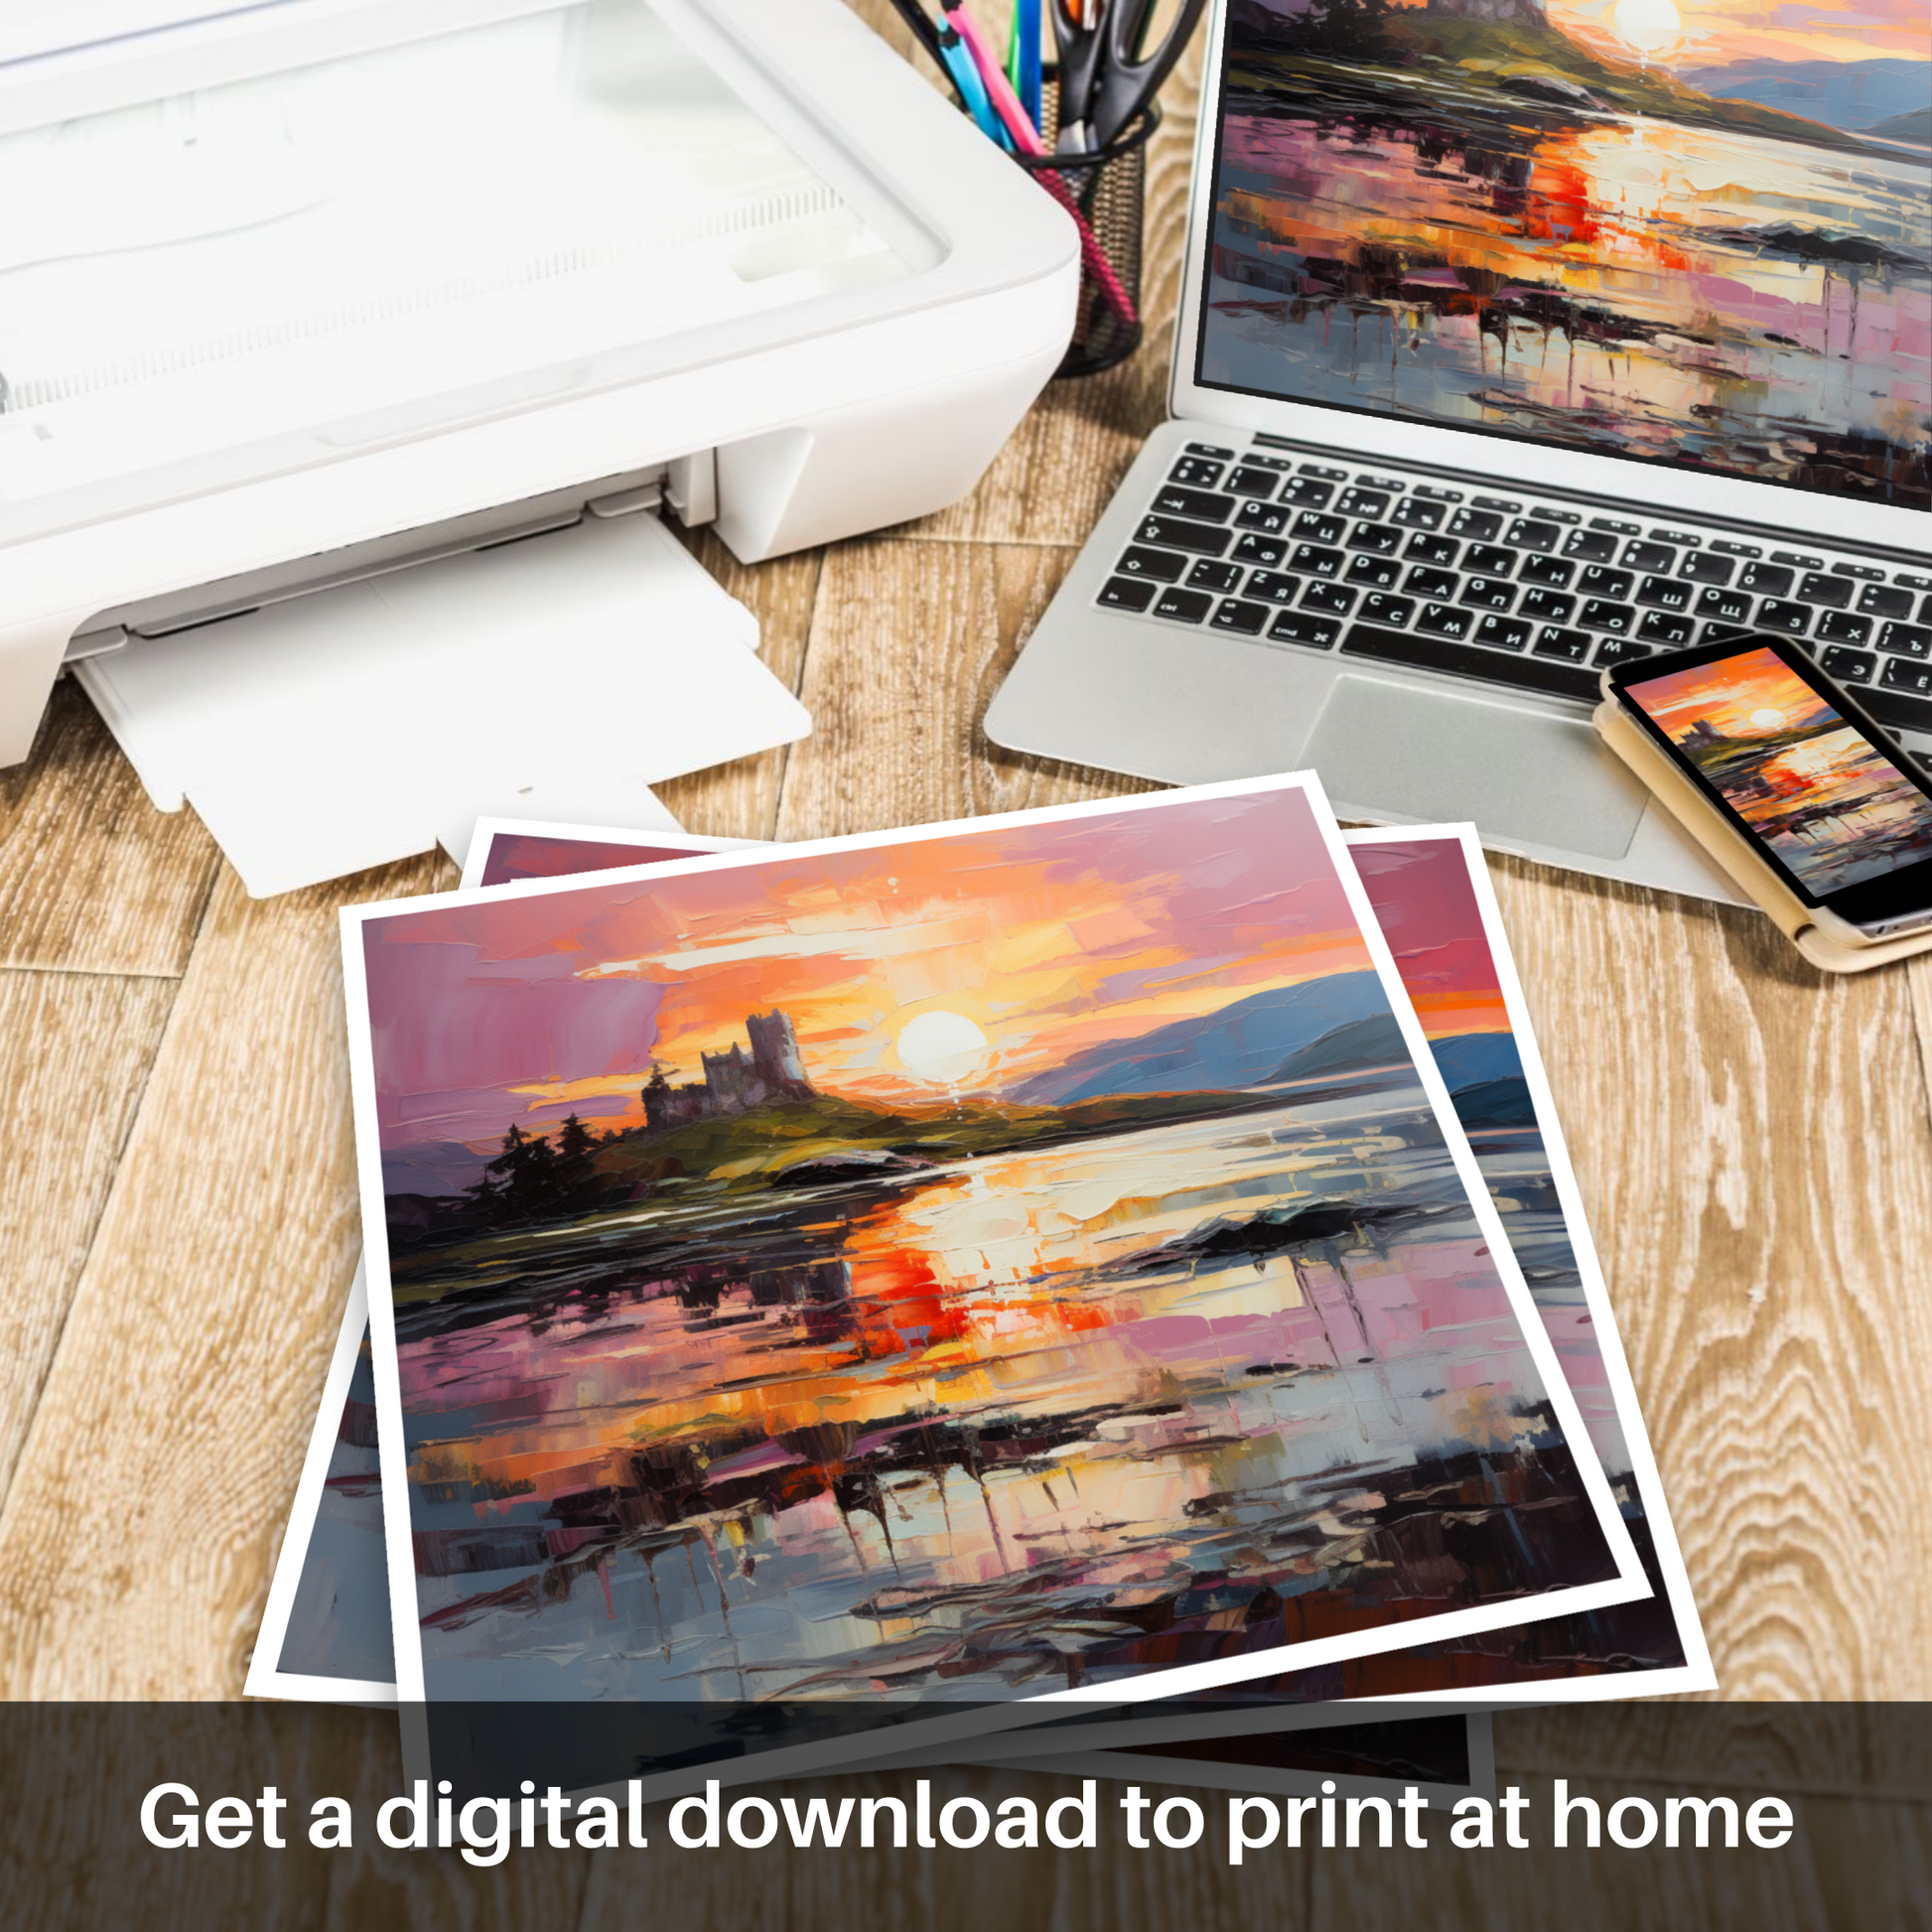 Downloadable and printable picture of Castle Stalker Bay at sunset